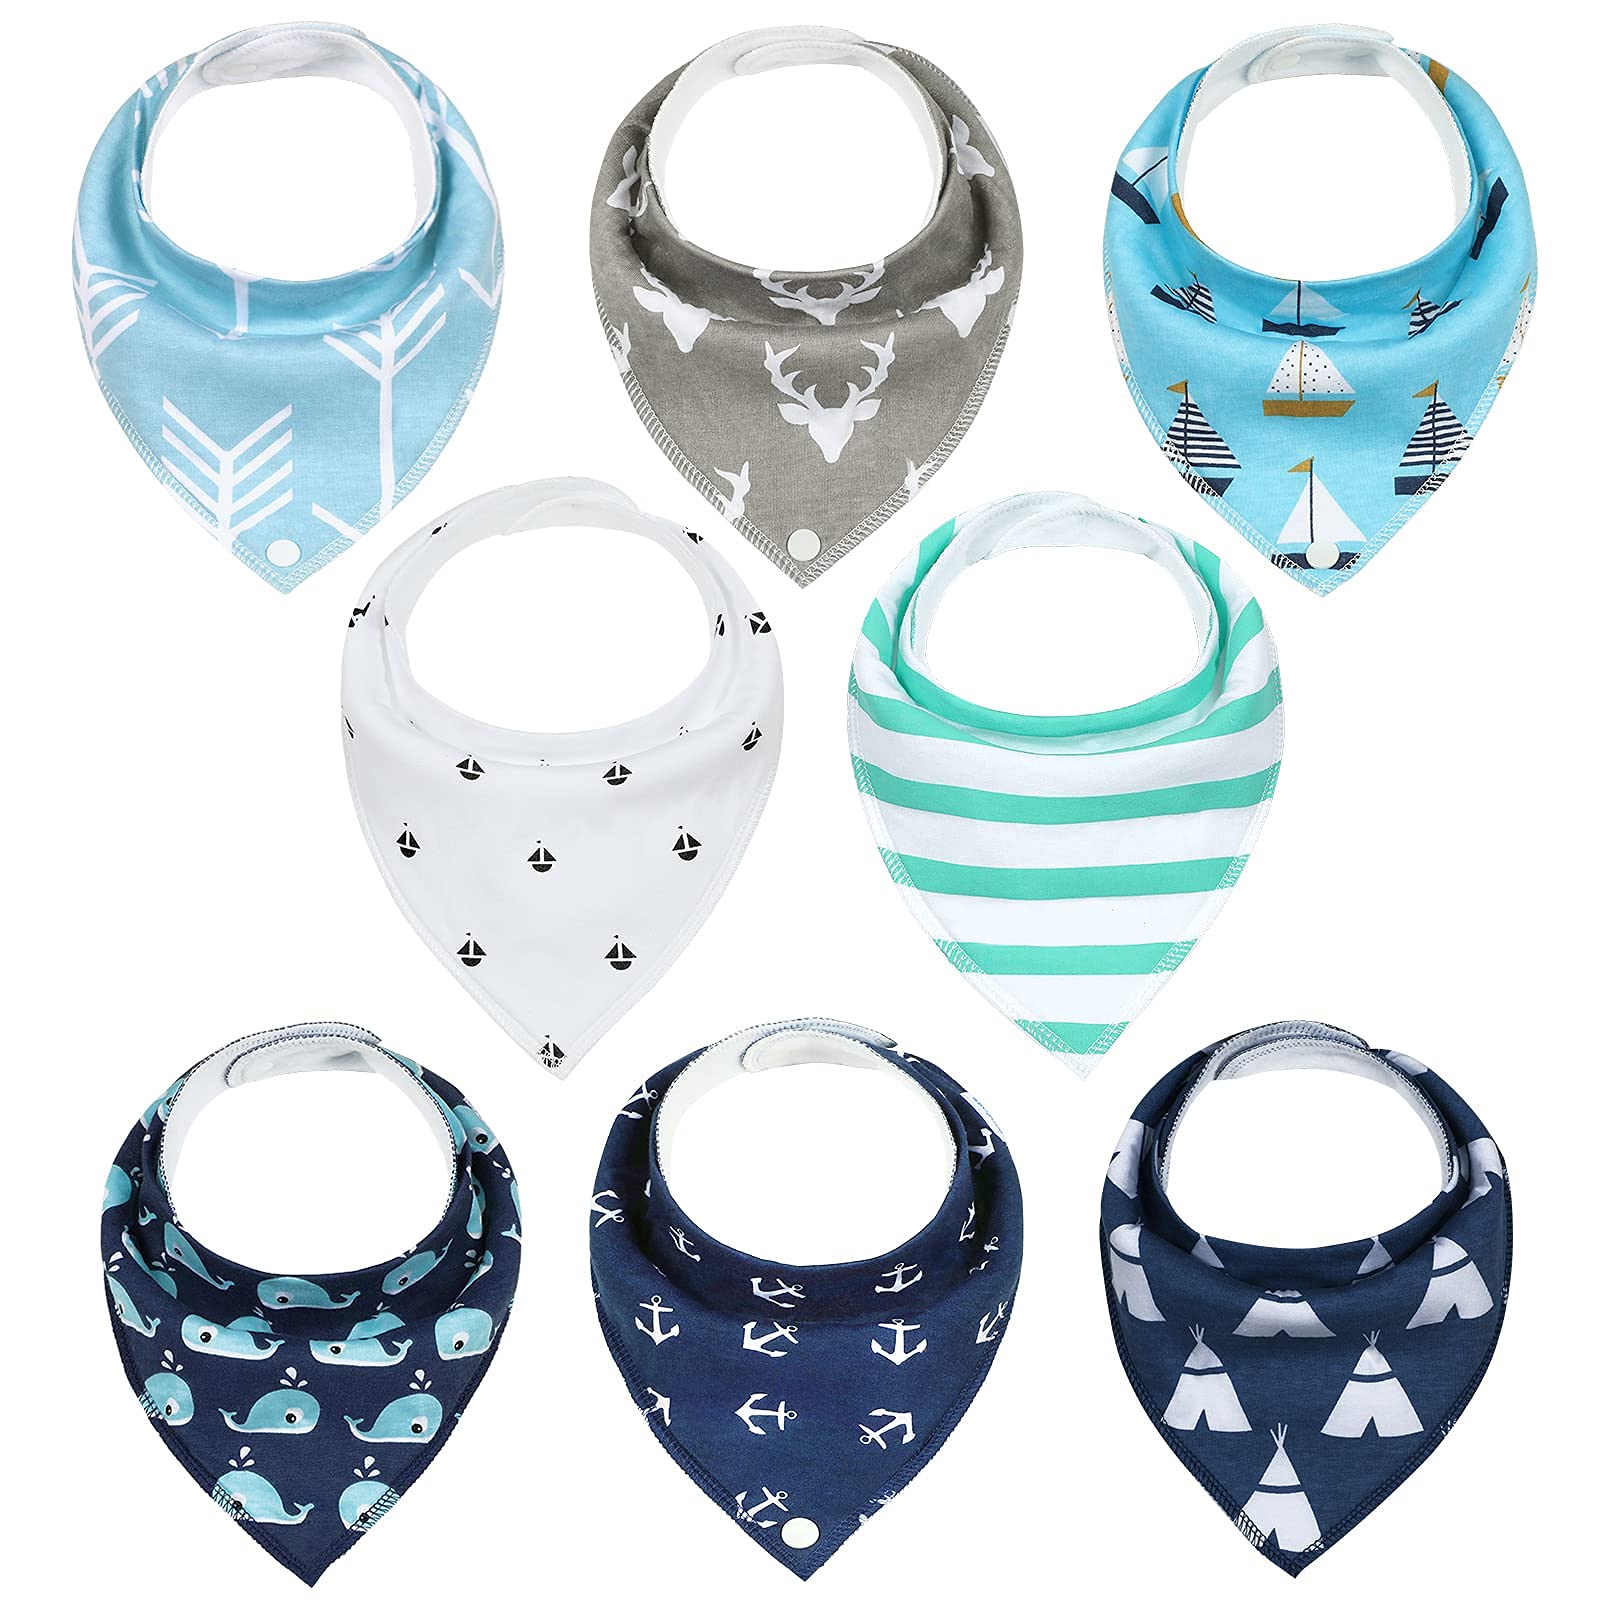 Yoofoss Baby Bibs 8 Pack Baby Bandana Drool Bibs Soft and Breathable for Boys and Girls